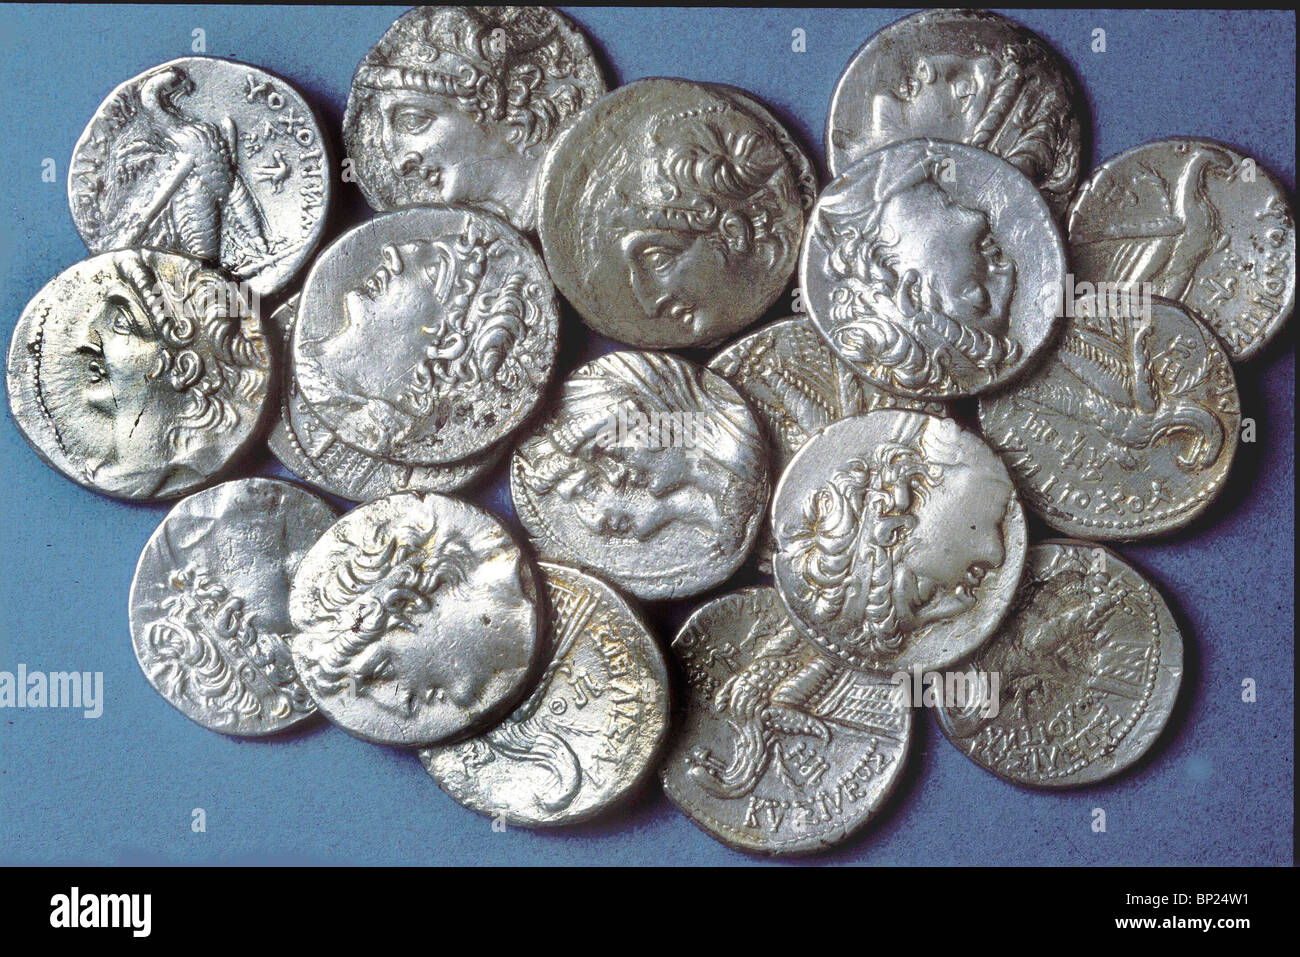 663. A HORDE OF TYREAN SILVER SHEKELS Stock Photo